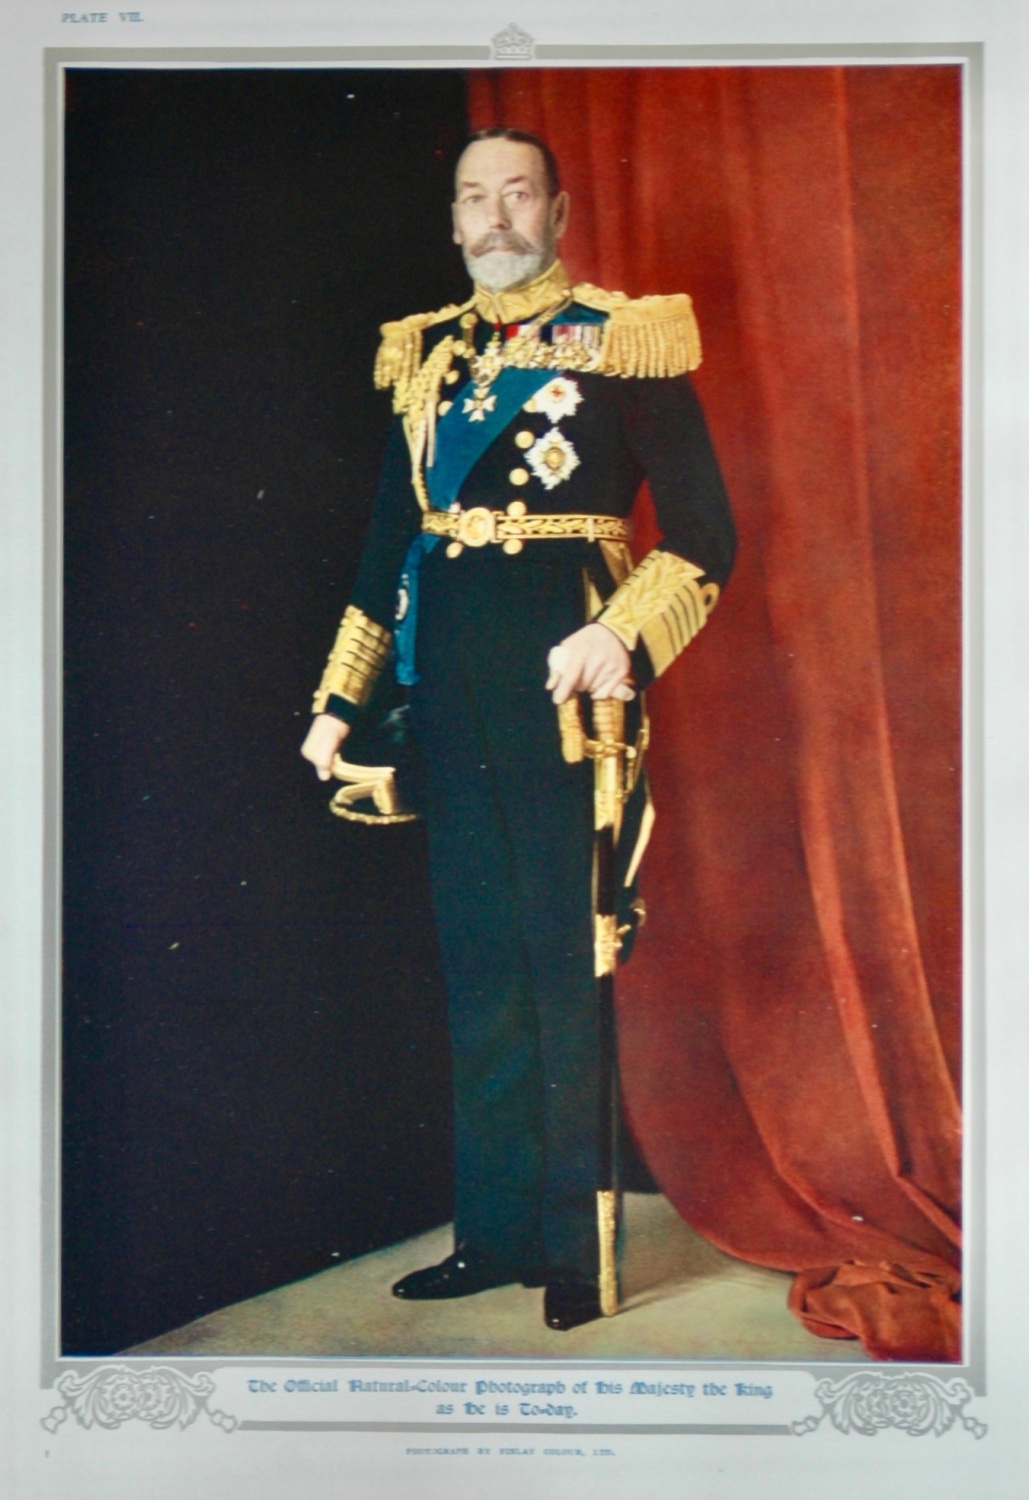 The Official Natural-Colour Photograph of His Majesty the King as he is To-